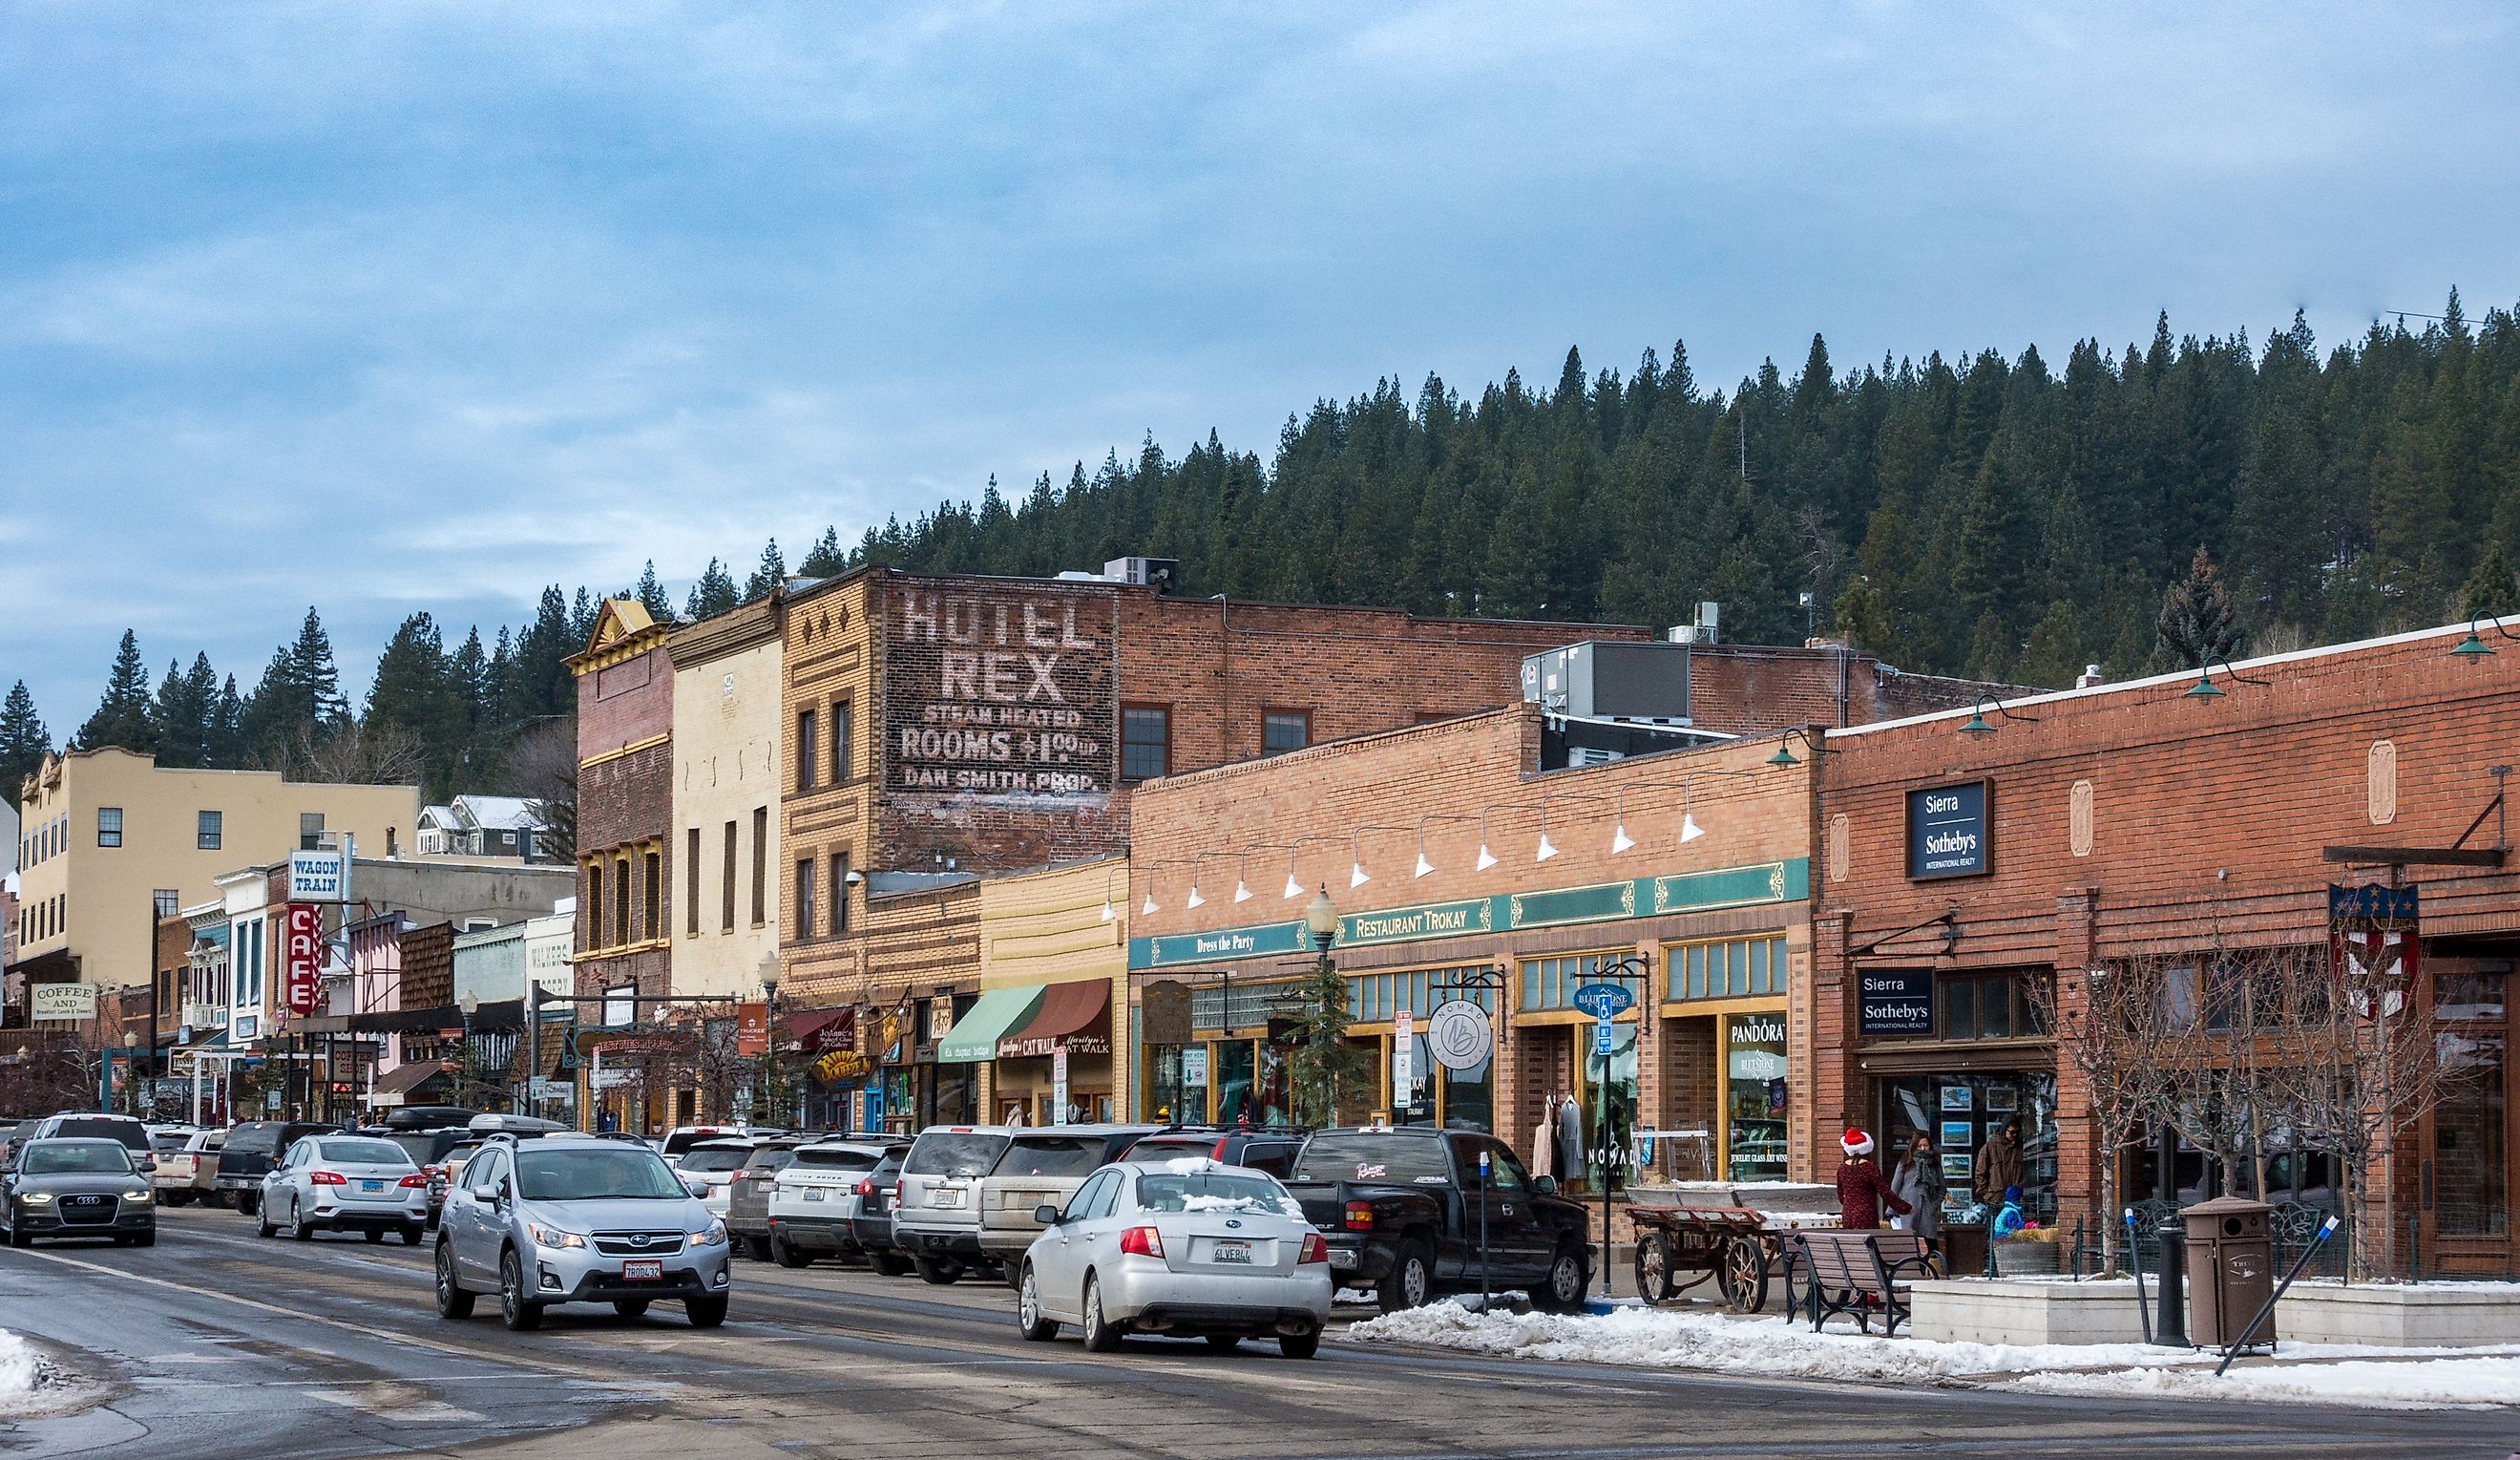 The Old Town of Truckee, on Donner Pass Road, via David A Litman / Shutterstock.com